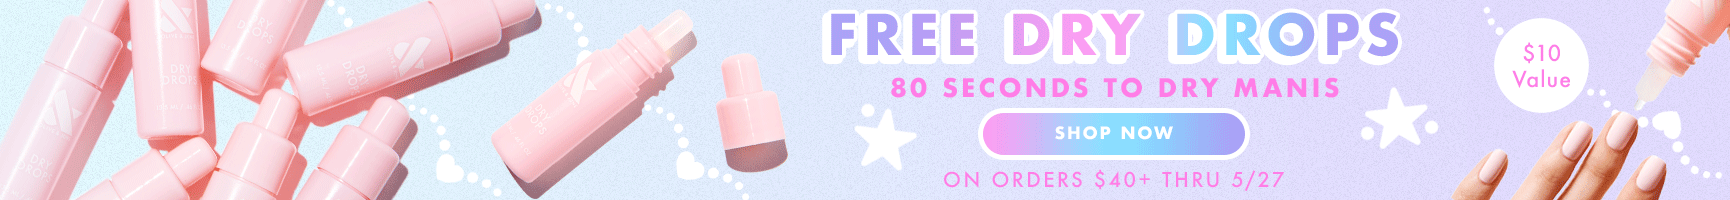 Free dry drops, 80 seconds to dry manis a $10 value - SHOP NOW *on orders $40+ through 5/27.